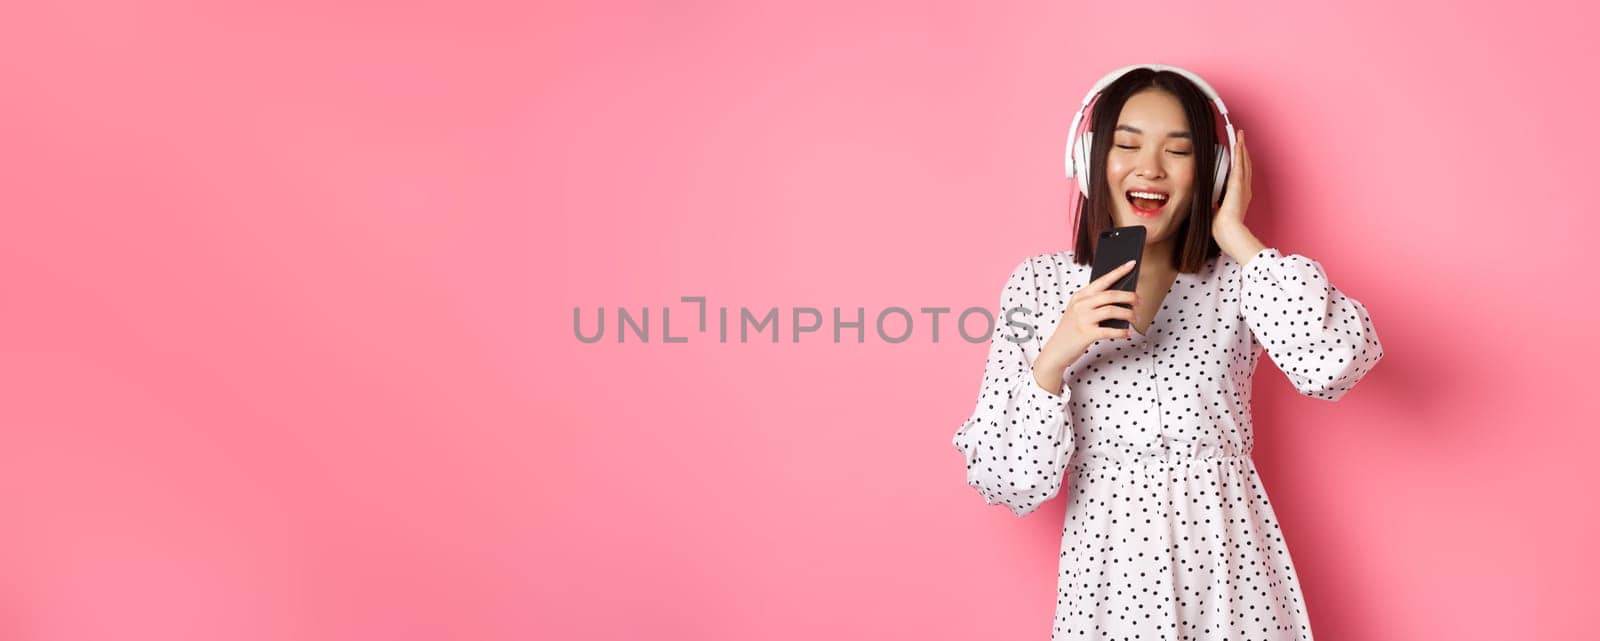 Cute asian woman playing karaoke app, singing in mobile phone and using headphones, standing in dress over pink background.